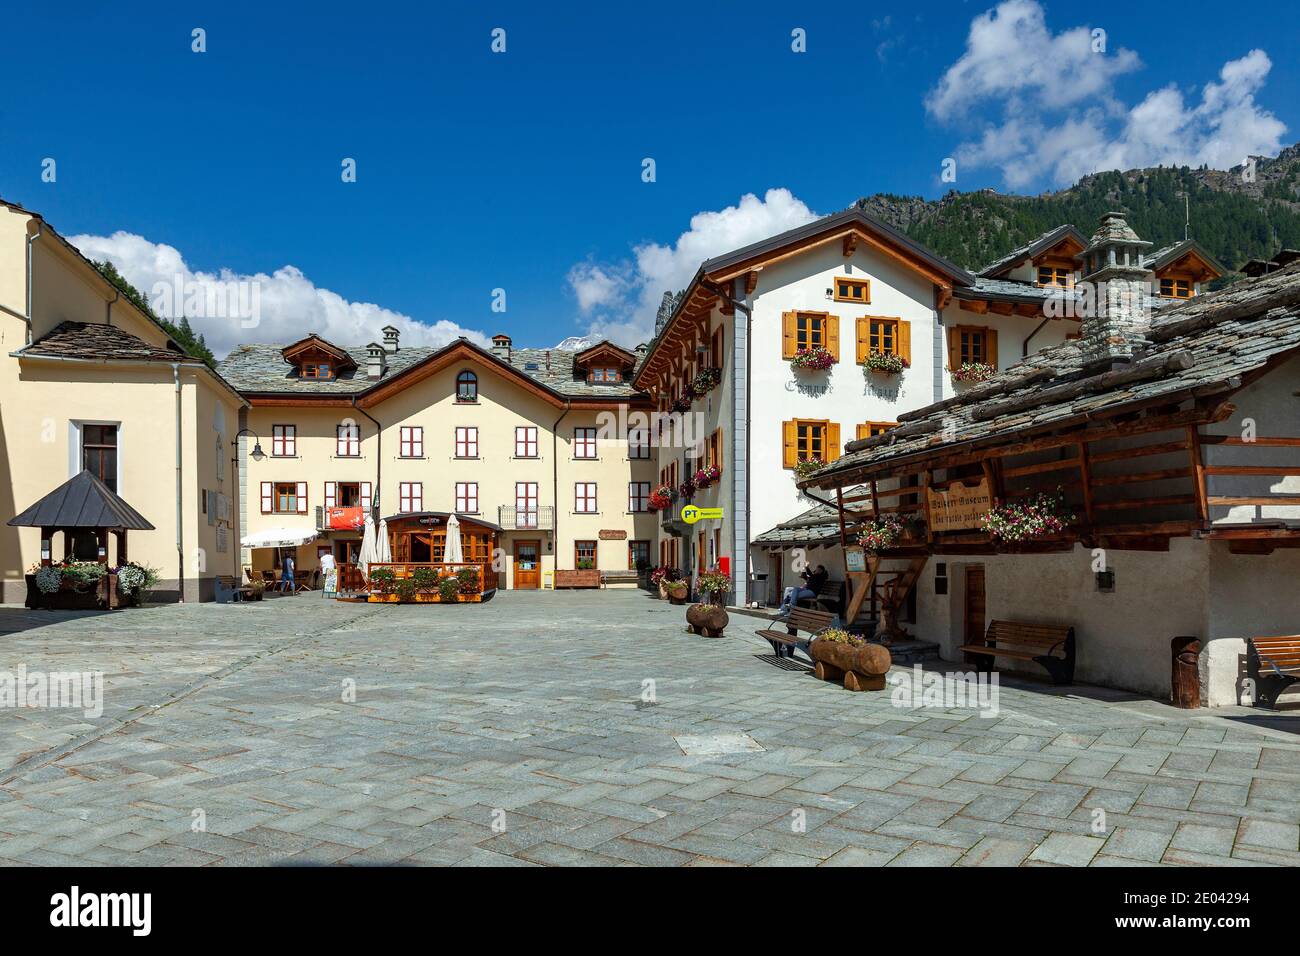 Square in the old town of Gressoney la Trinitè in Aosta Valley. Italy, Europe Stock Photo